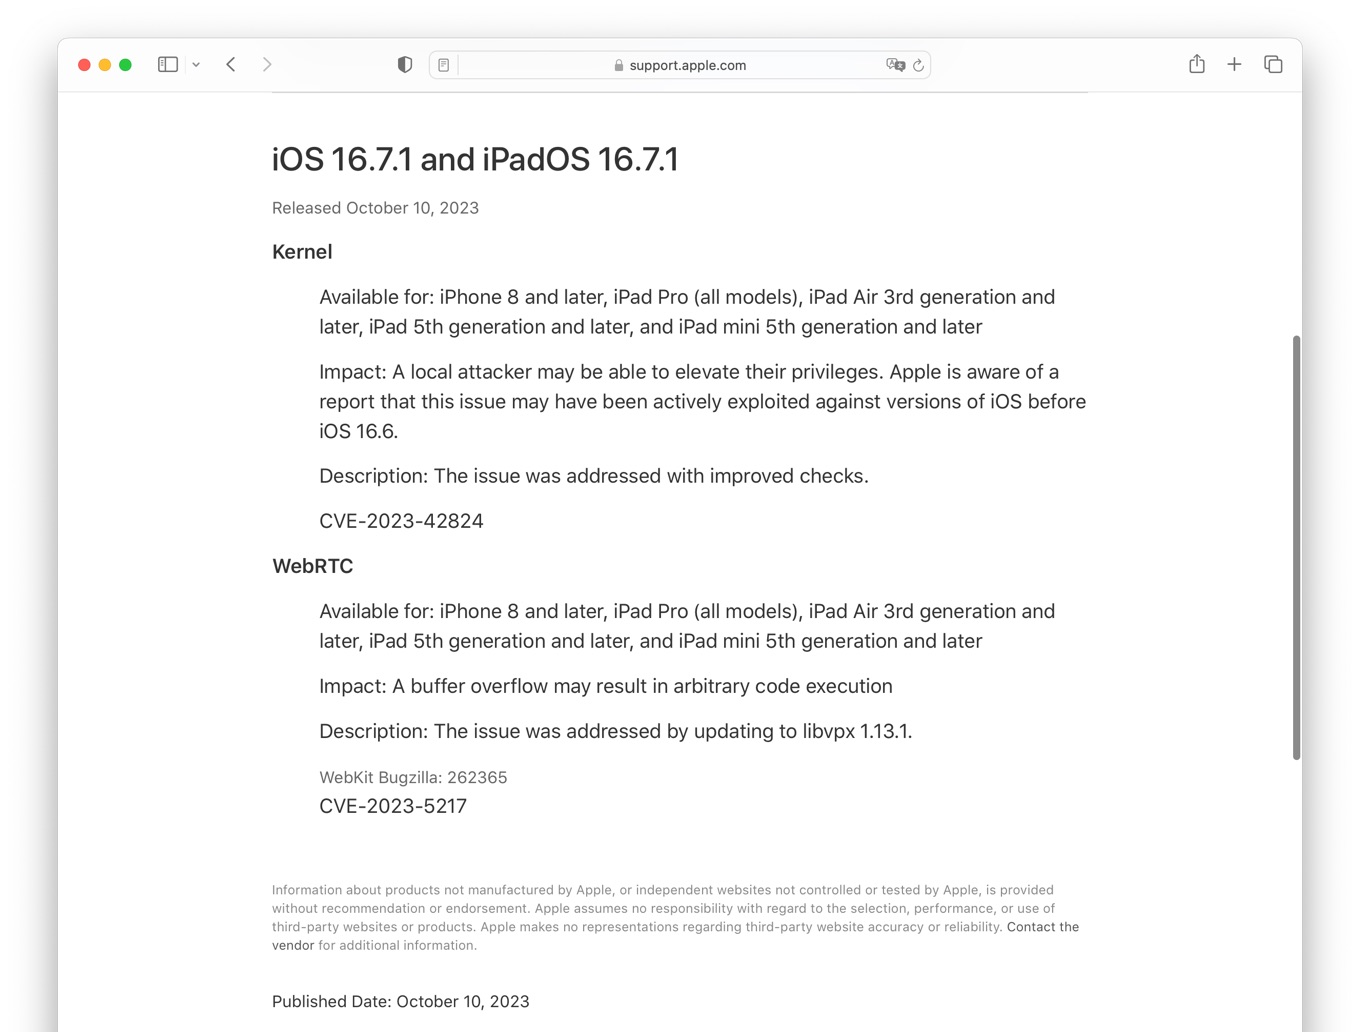 About the security content of iOS 16.7.1 and iPadOS 16.7.1